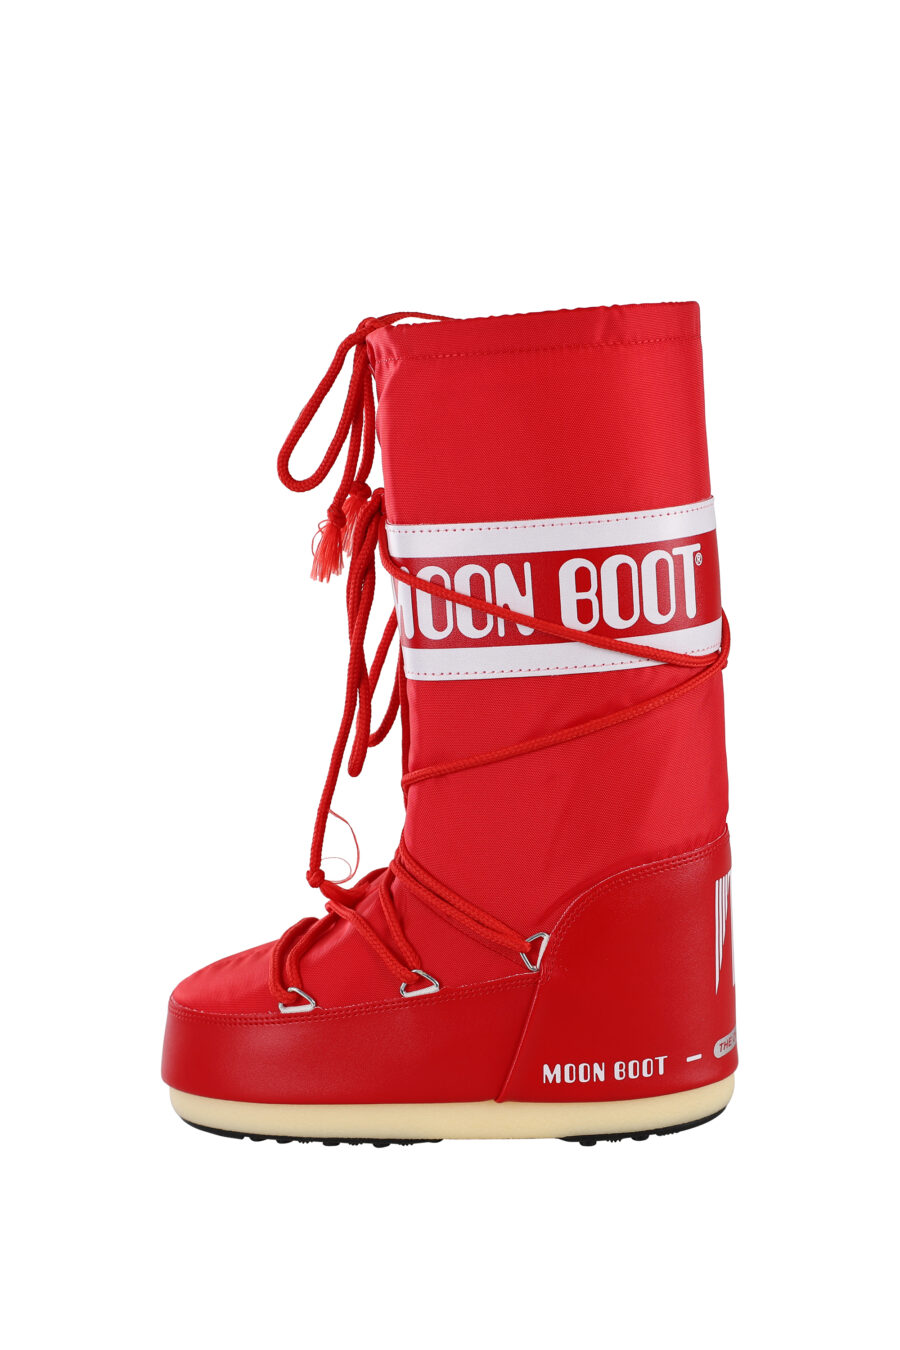 Red snow boots with white logo - IMG 6747